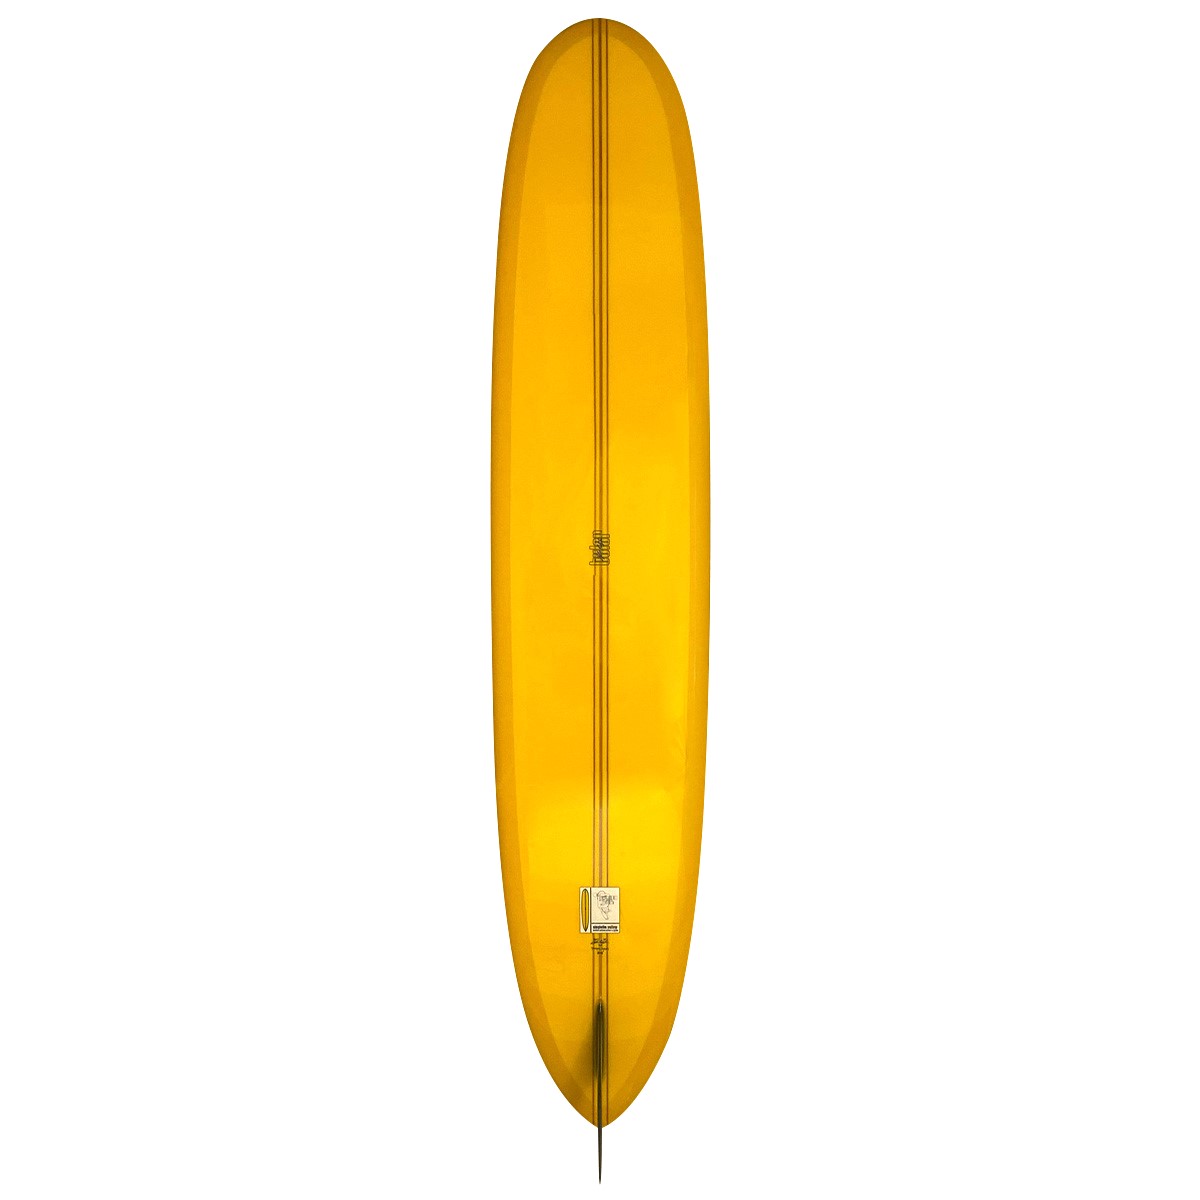 TYLER / SINGLE FIN YELLOW 9`8 limited edition series #17/20